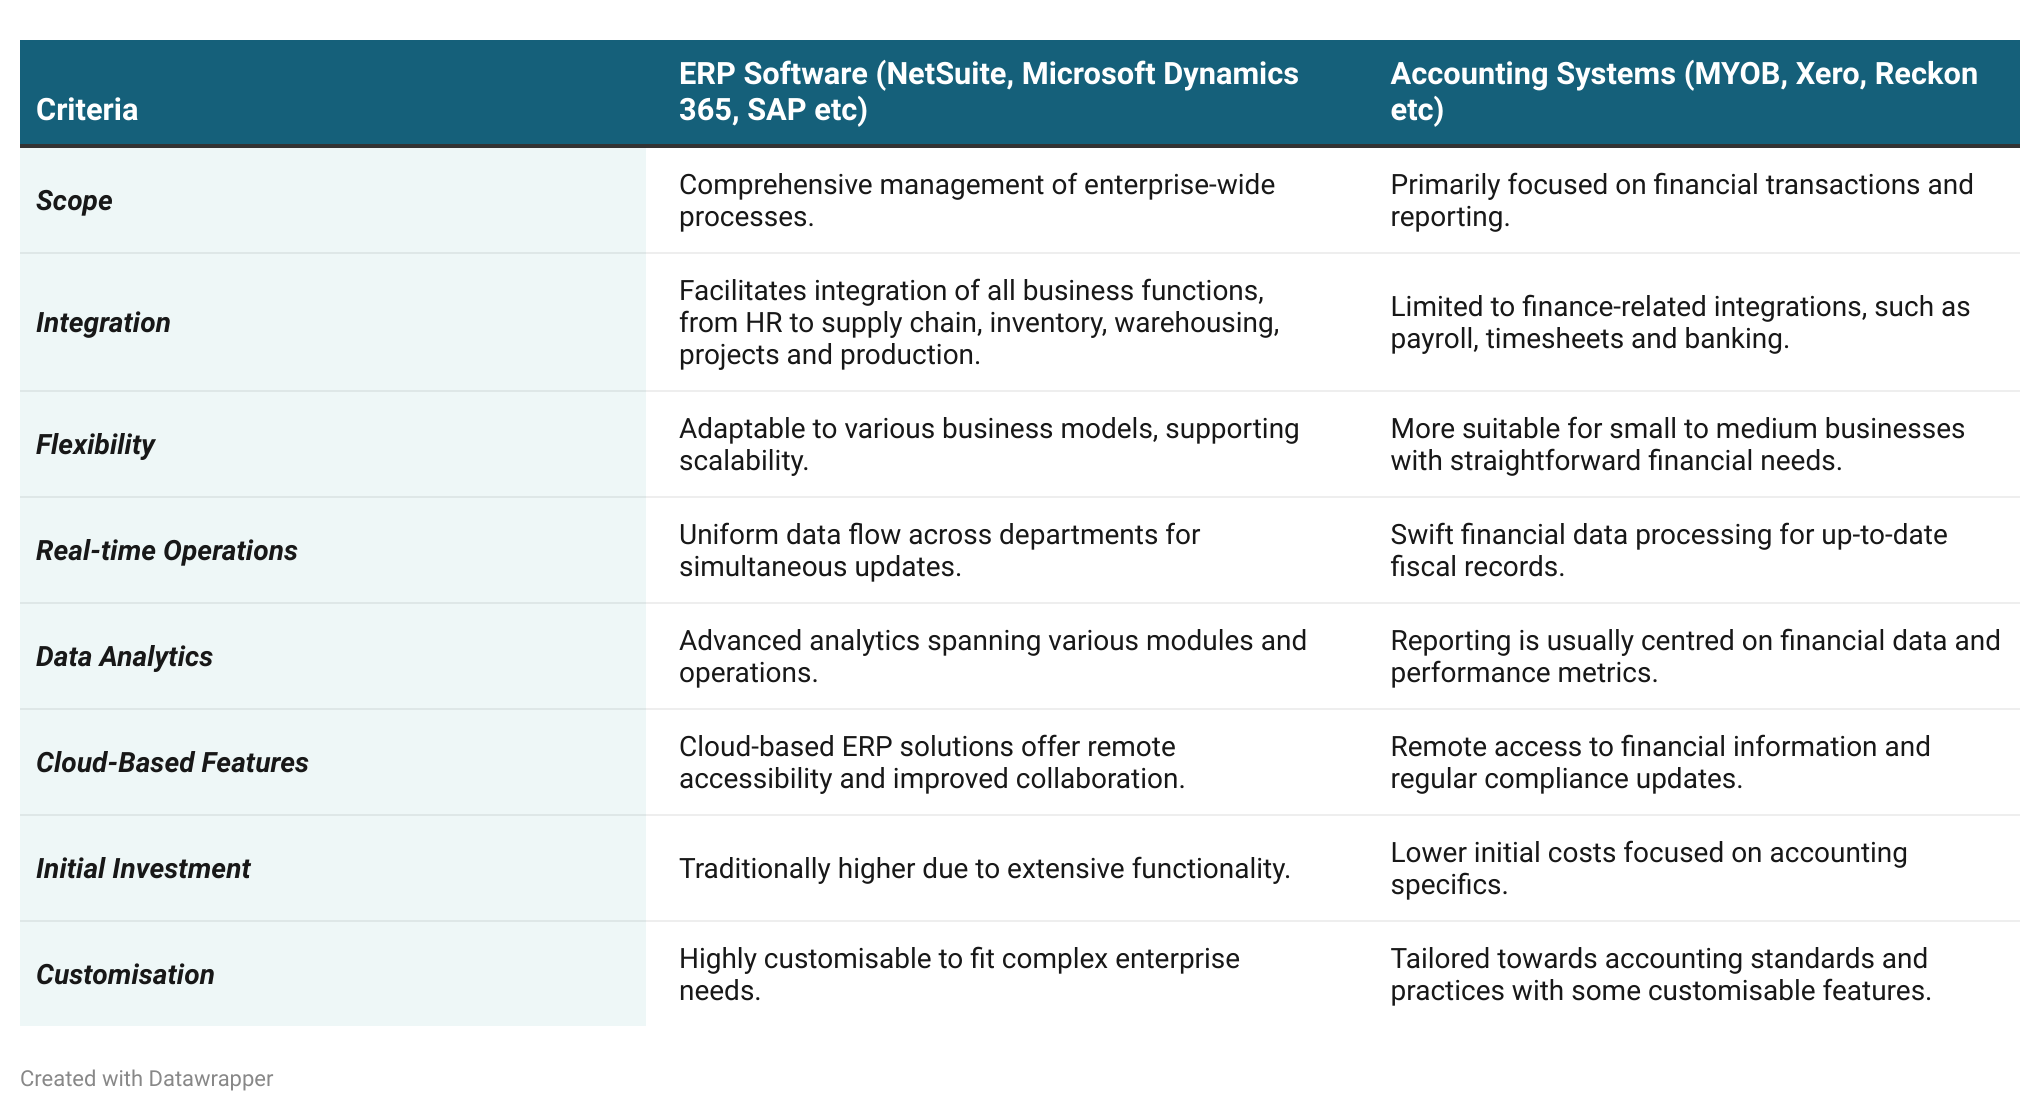 Comparing the Best ERP Software with the Top Accounting Systems